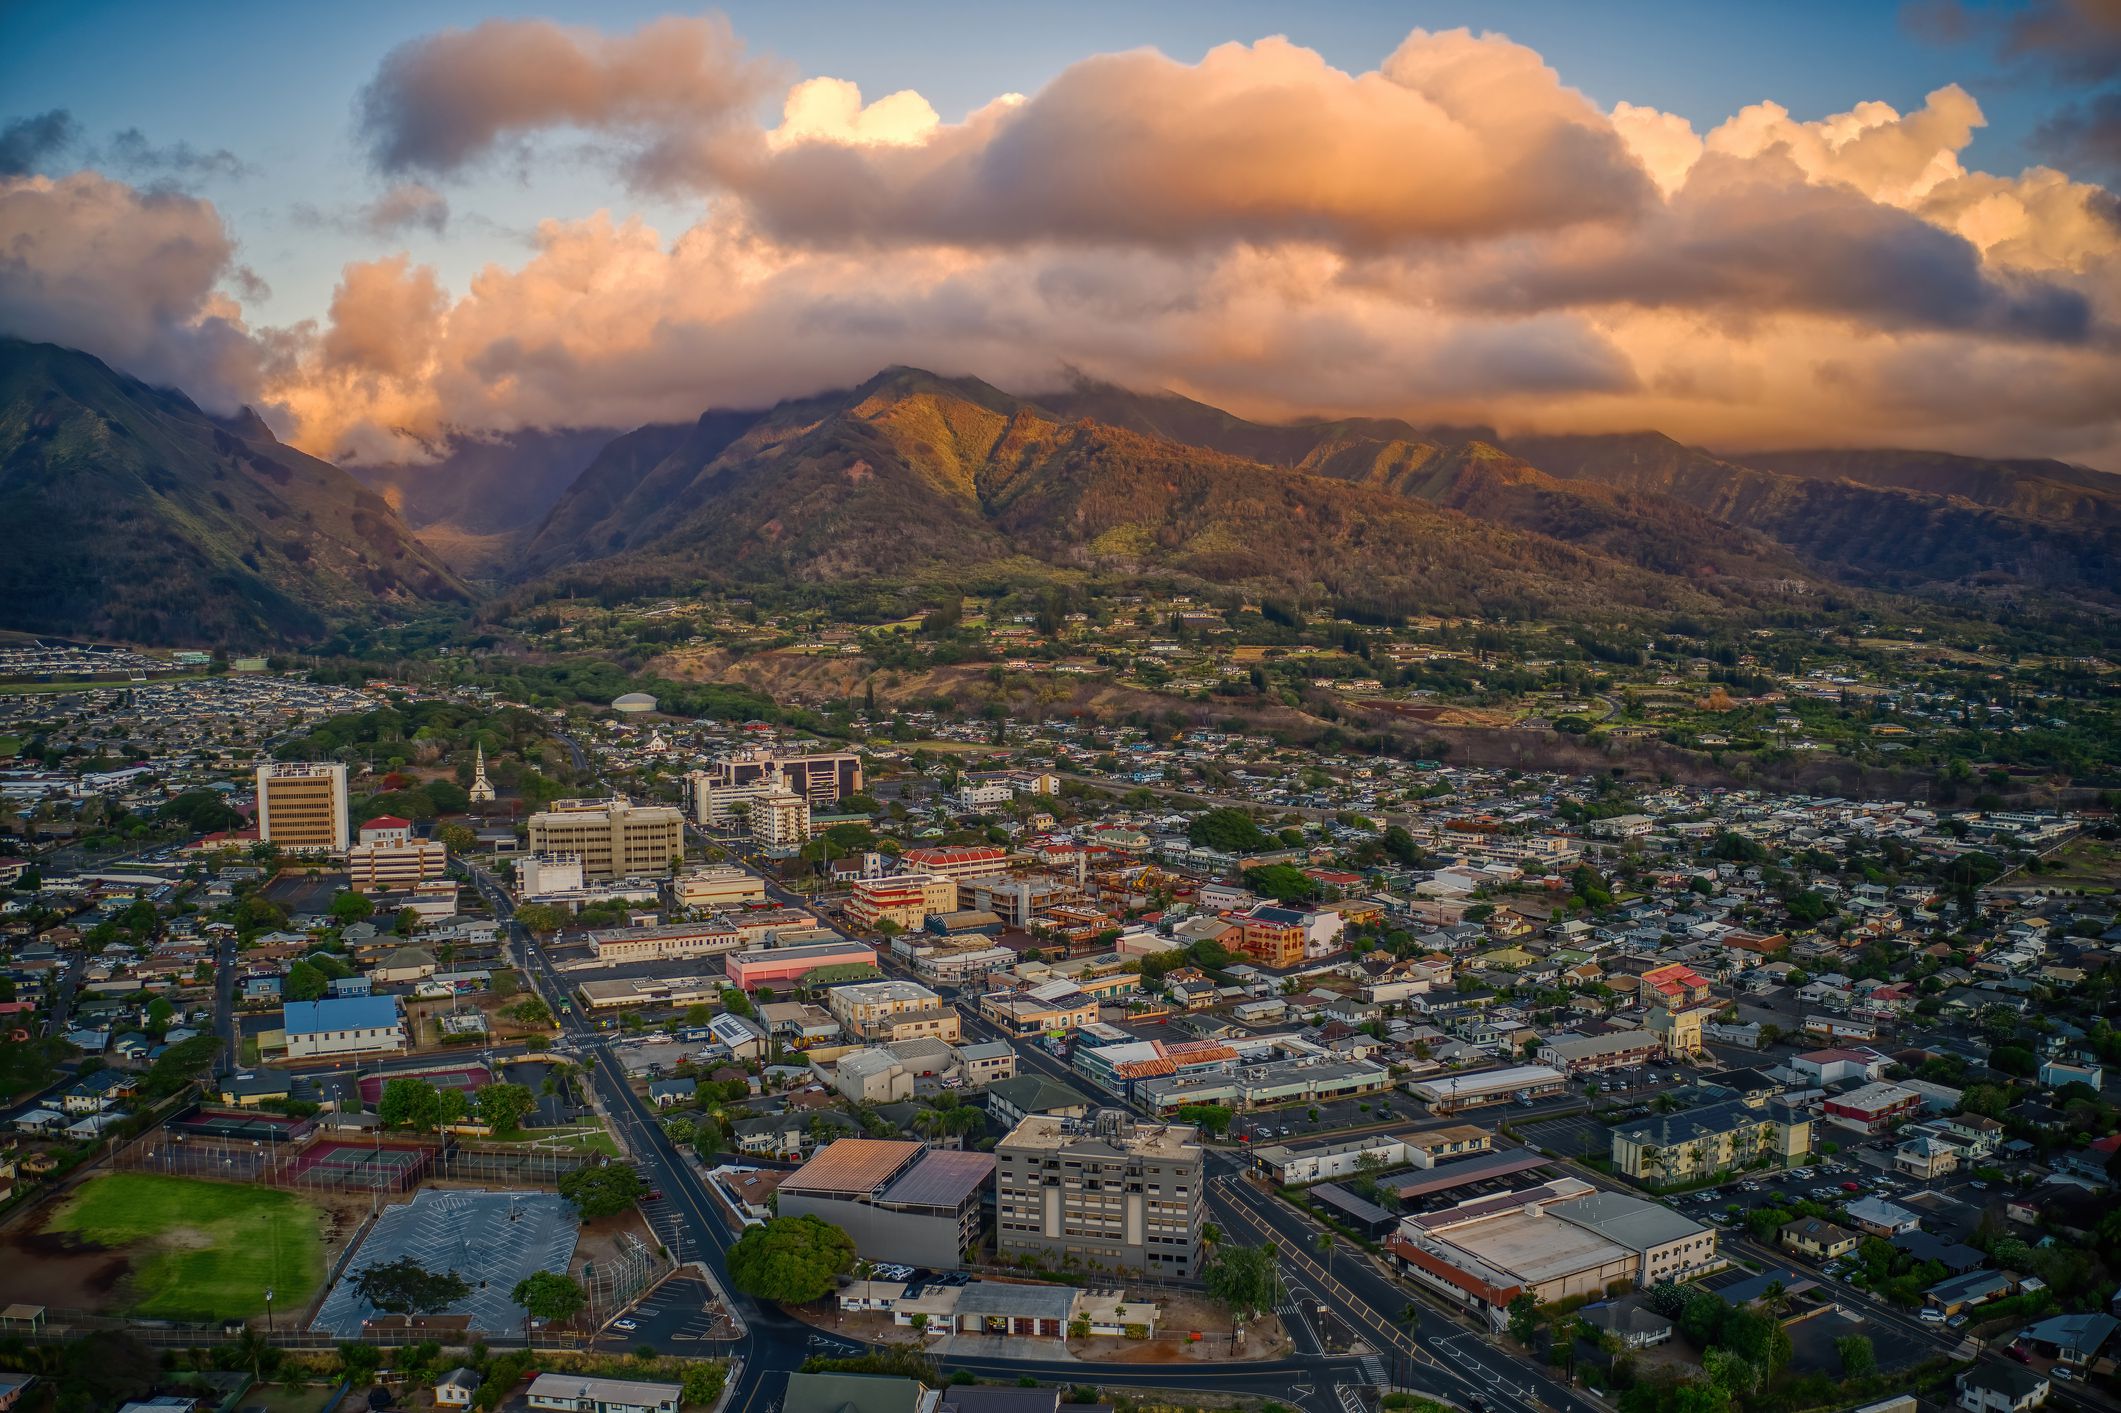 <p>Wailuku is located in northwestern Maui. It boasts a famous market street packed with local, family-owned shops. The city has a vibrant restaurant scene, historic structures, and one hospital. About 18% of the population is 65 and older.</p><ul><li>Population: 17,697</li><li>Median Household Income: $83,393</li><li>Cost of Living: 145% of U.S. average</li><li>Median Rent Price: $3,579</li><li>Home Price-to-Income Ratio: 10.5</li><li>Average Property Tax: 0.21%</li></ul><p class="padding-top-ms u-margin-bottom-ms"><b>Housing Affordability: </b>The average price to rent a home in Wailuku is $3,579, which is nearly 80% more than the national average. As noted above, prices have risen in the last year. The average home value here tops $870,000.</p>